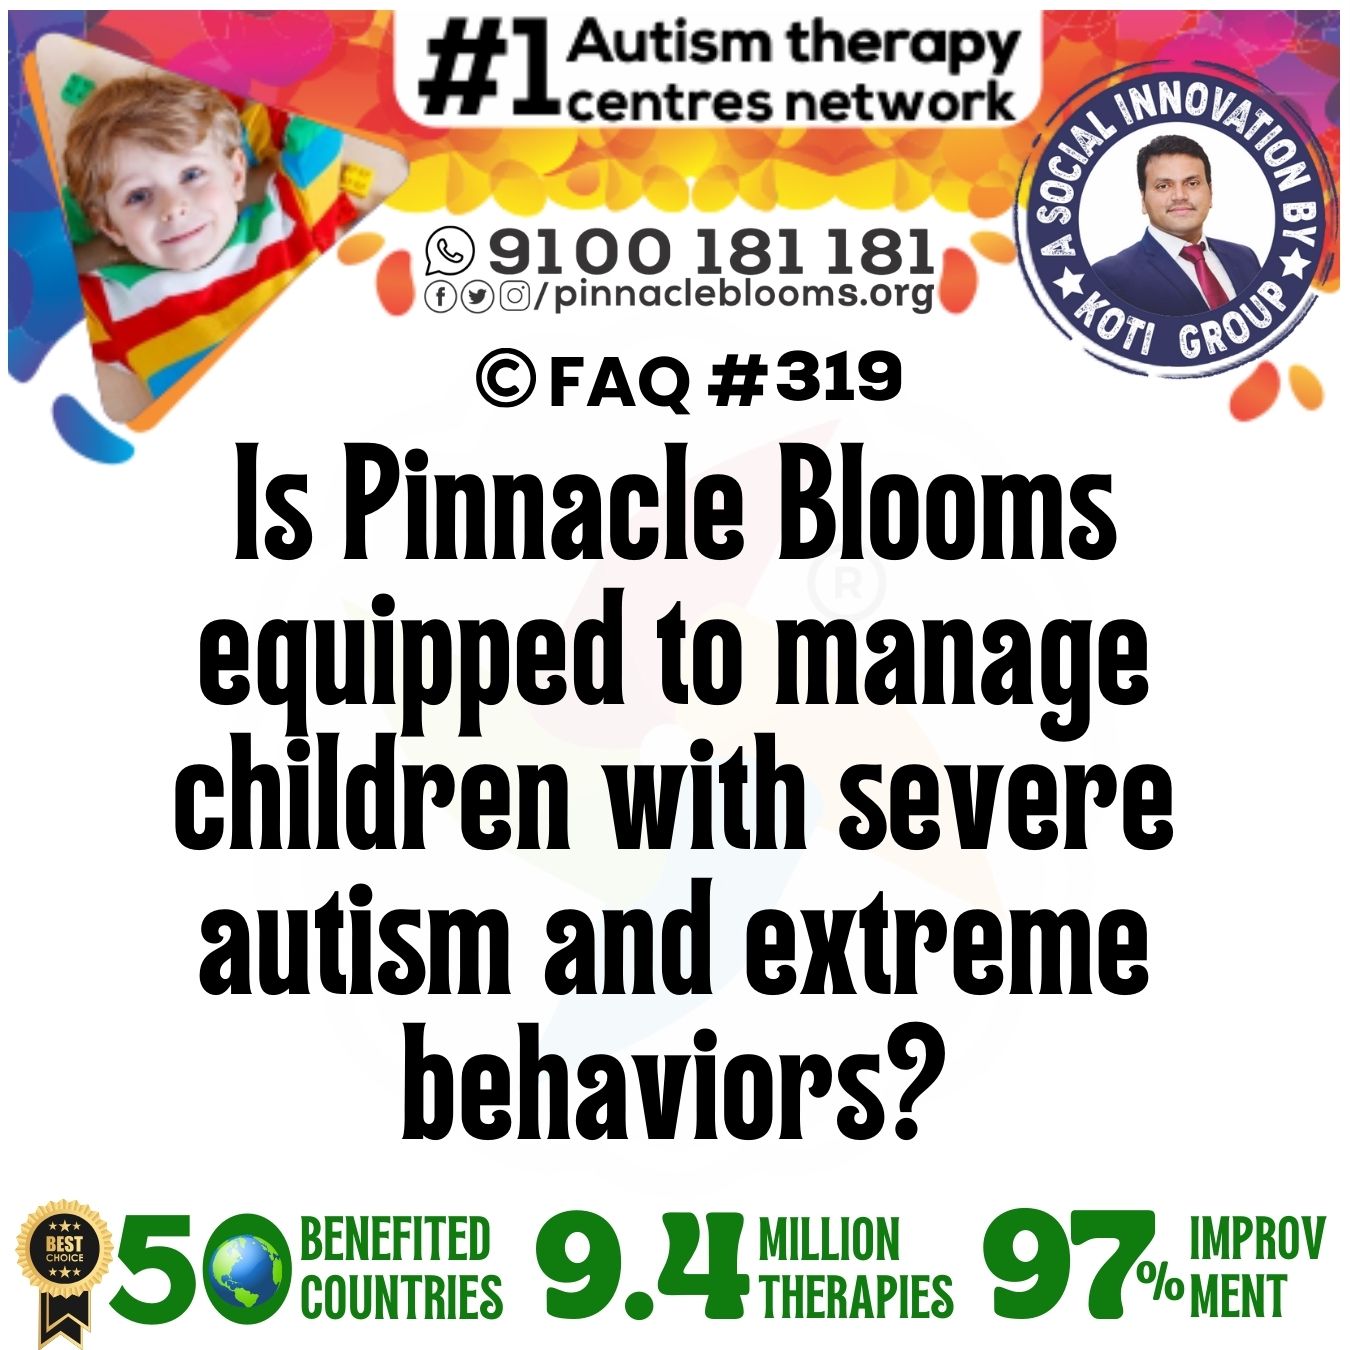 Is Pinnacle Blooms equipped to manage children with severe autism and extreme behaviors?